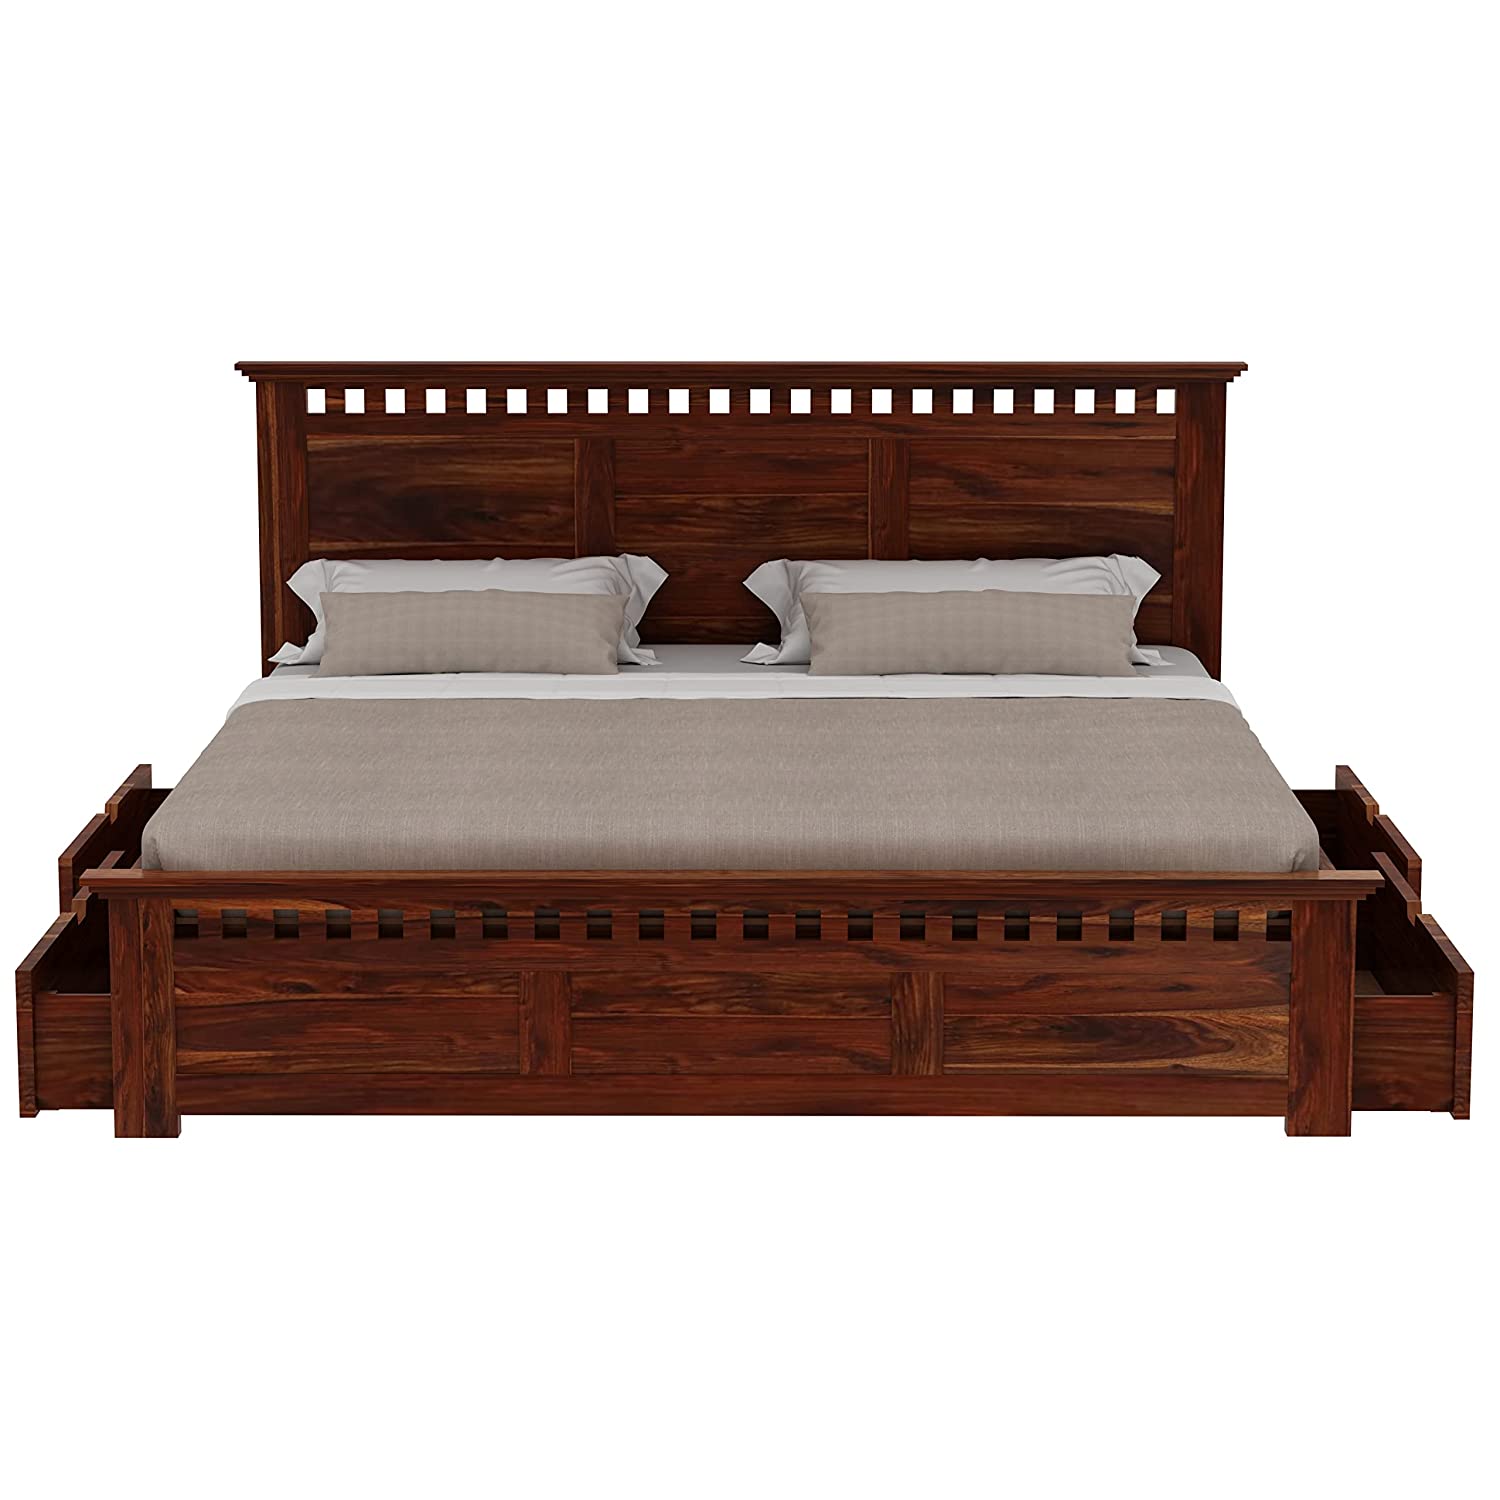 Amer Solid Sheesham Wood Bed With Four Drawers (Queen Size, Natural Finish)